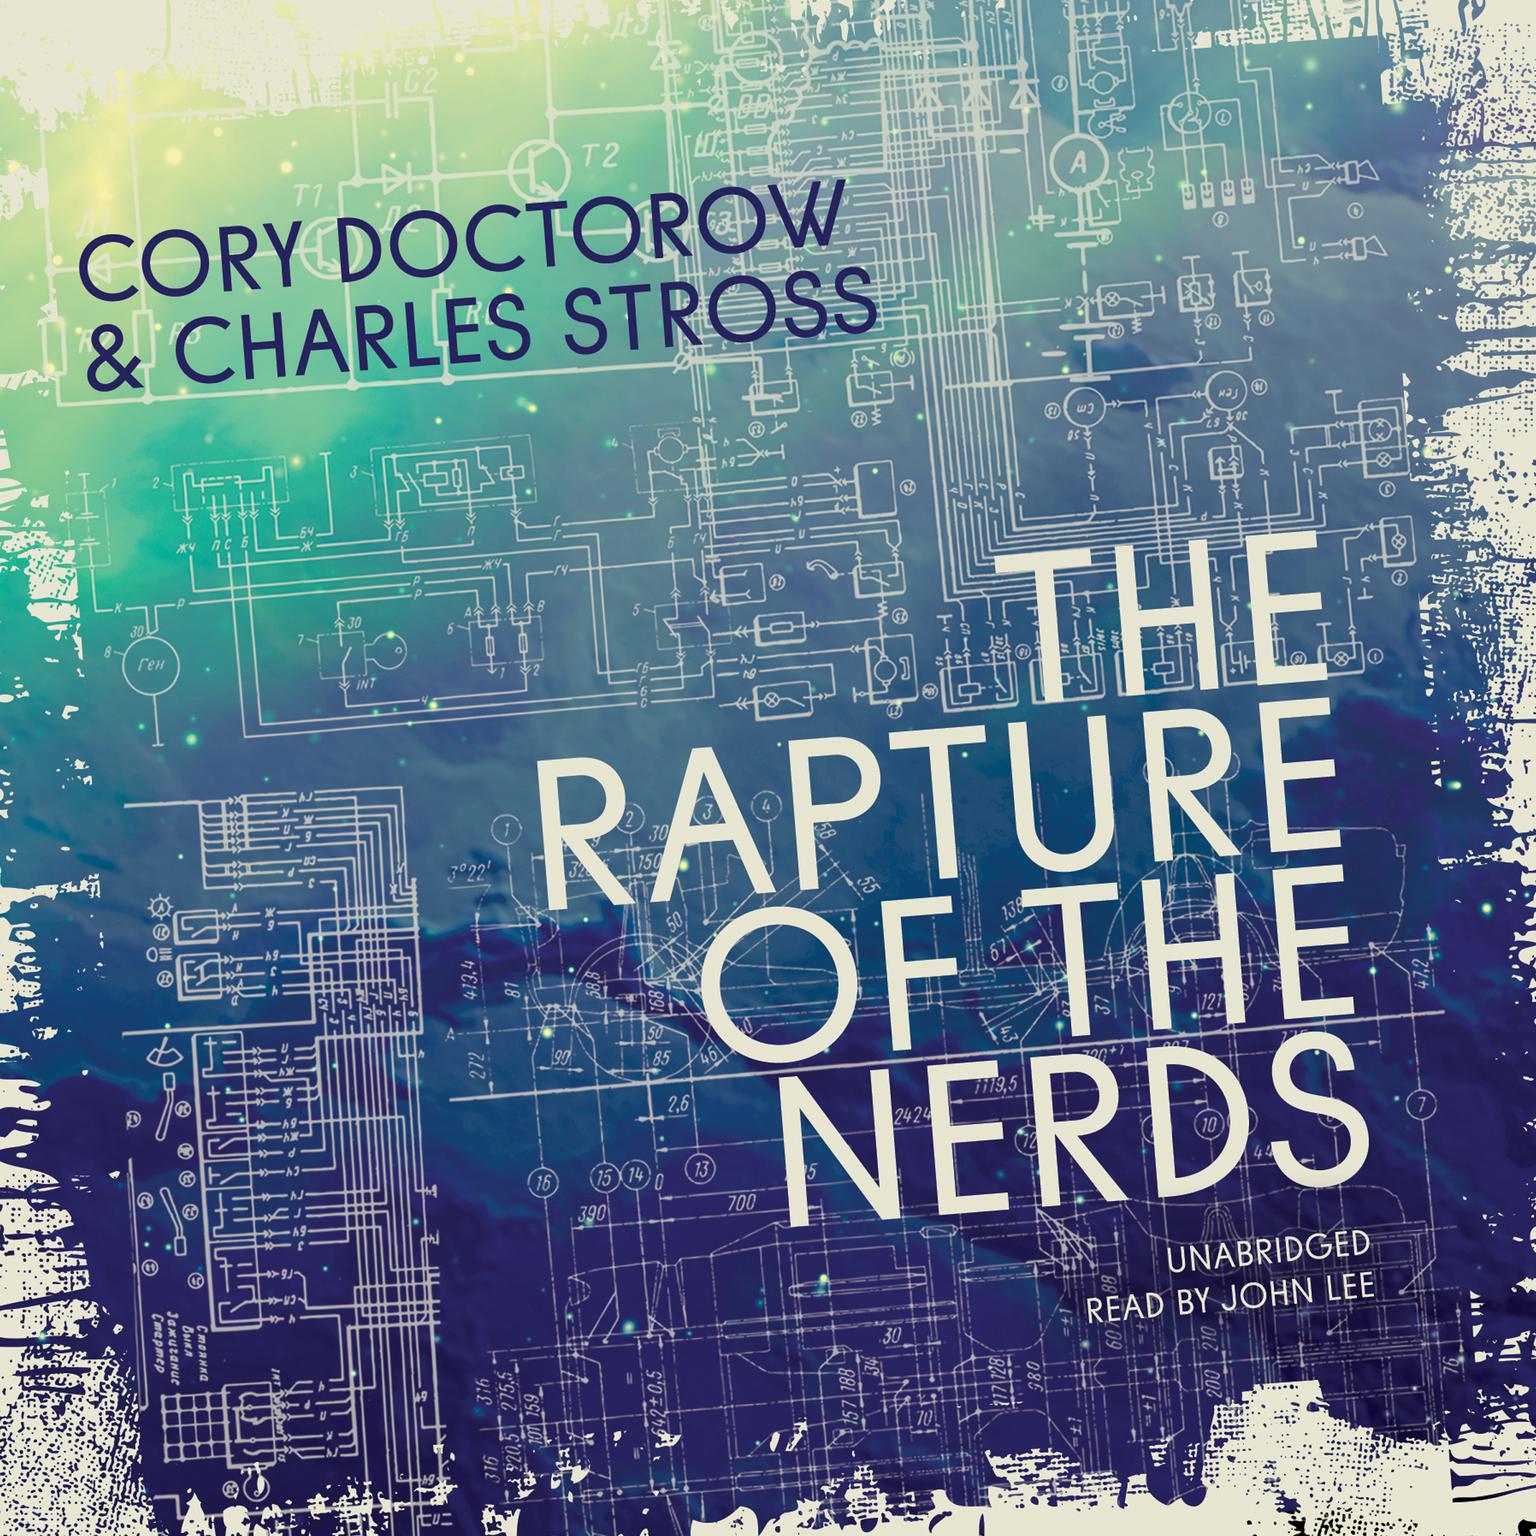 The Rapture of the Nerds Audiobook, by Cory Doctorow